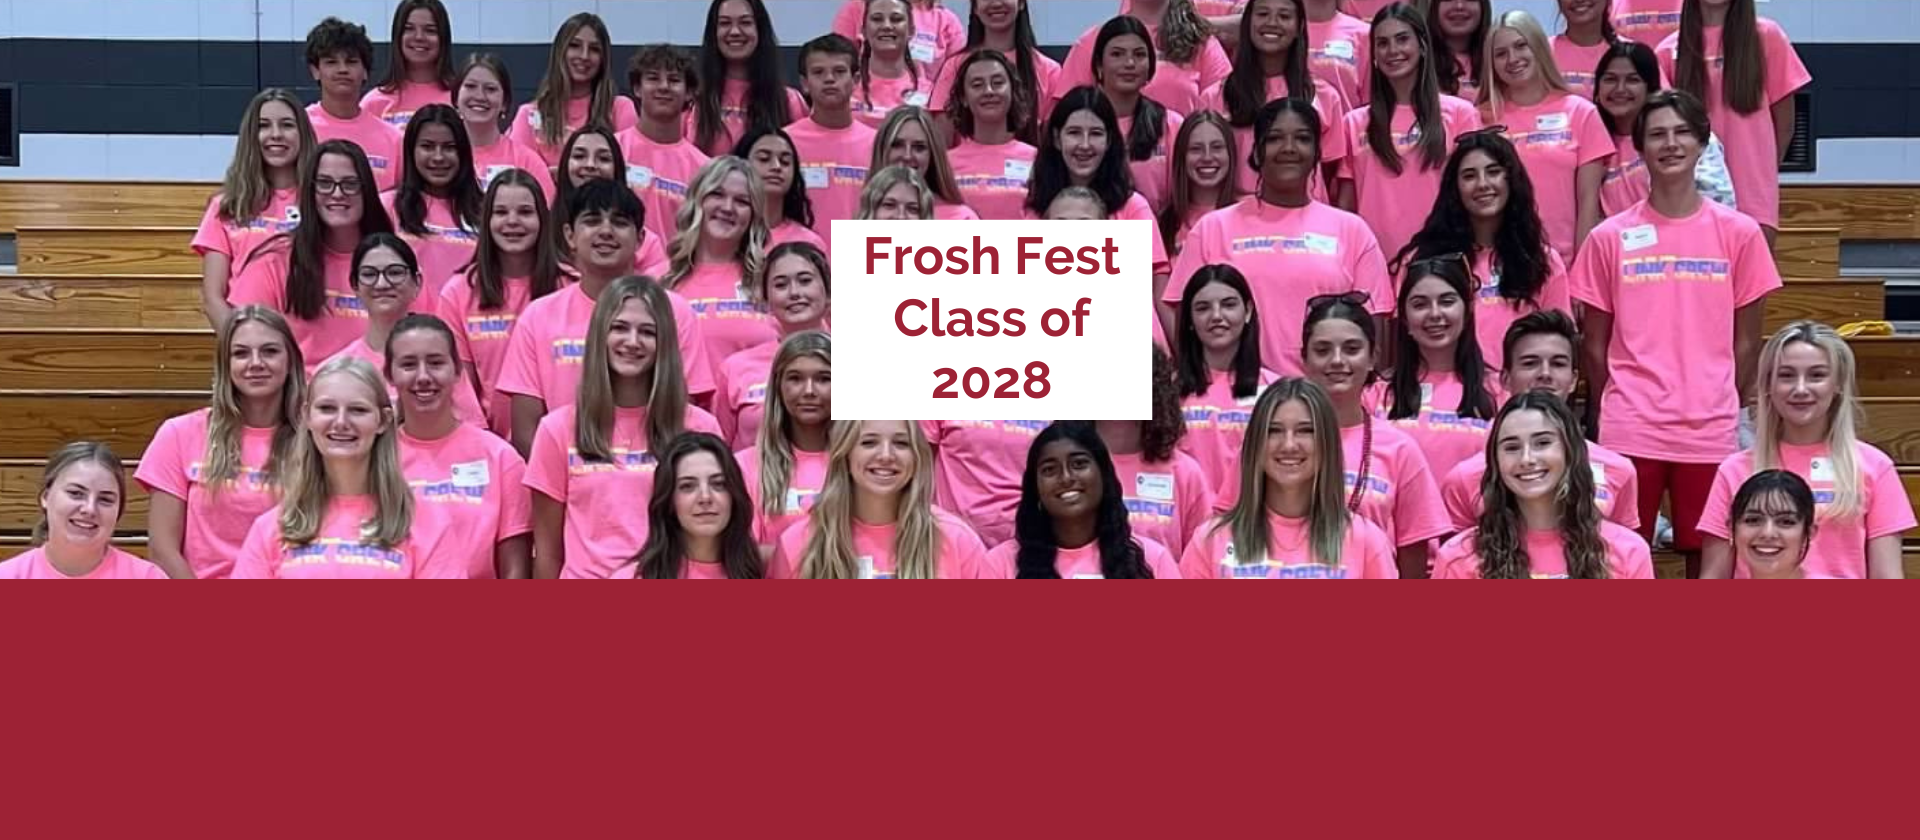 <h1>Frosh Fest!</h1>
<p>Incoming freshmen are invited to BHS&#8217;s Frosh Fest on August 13th from 9:00 AM to 11:30 AM.</p>
<p>&nbsp;</p>
<a href="https://docs.google.com/forms/d/e/1FAIpQLSc22CaYCKN_Zg7dSg8yh9Sxq6JwjZkuTQaZT4C2p-6Zttmv_w/viewform" class="button ">Sign Up</a>
